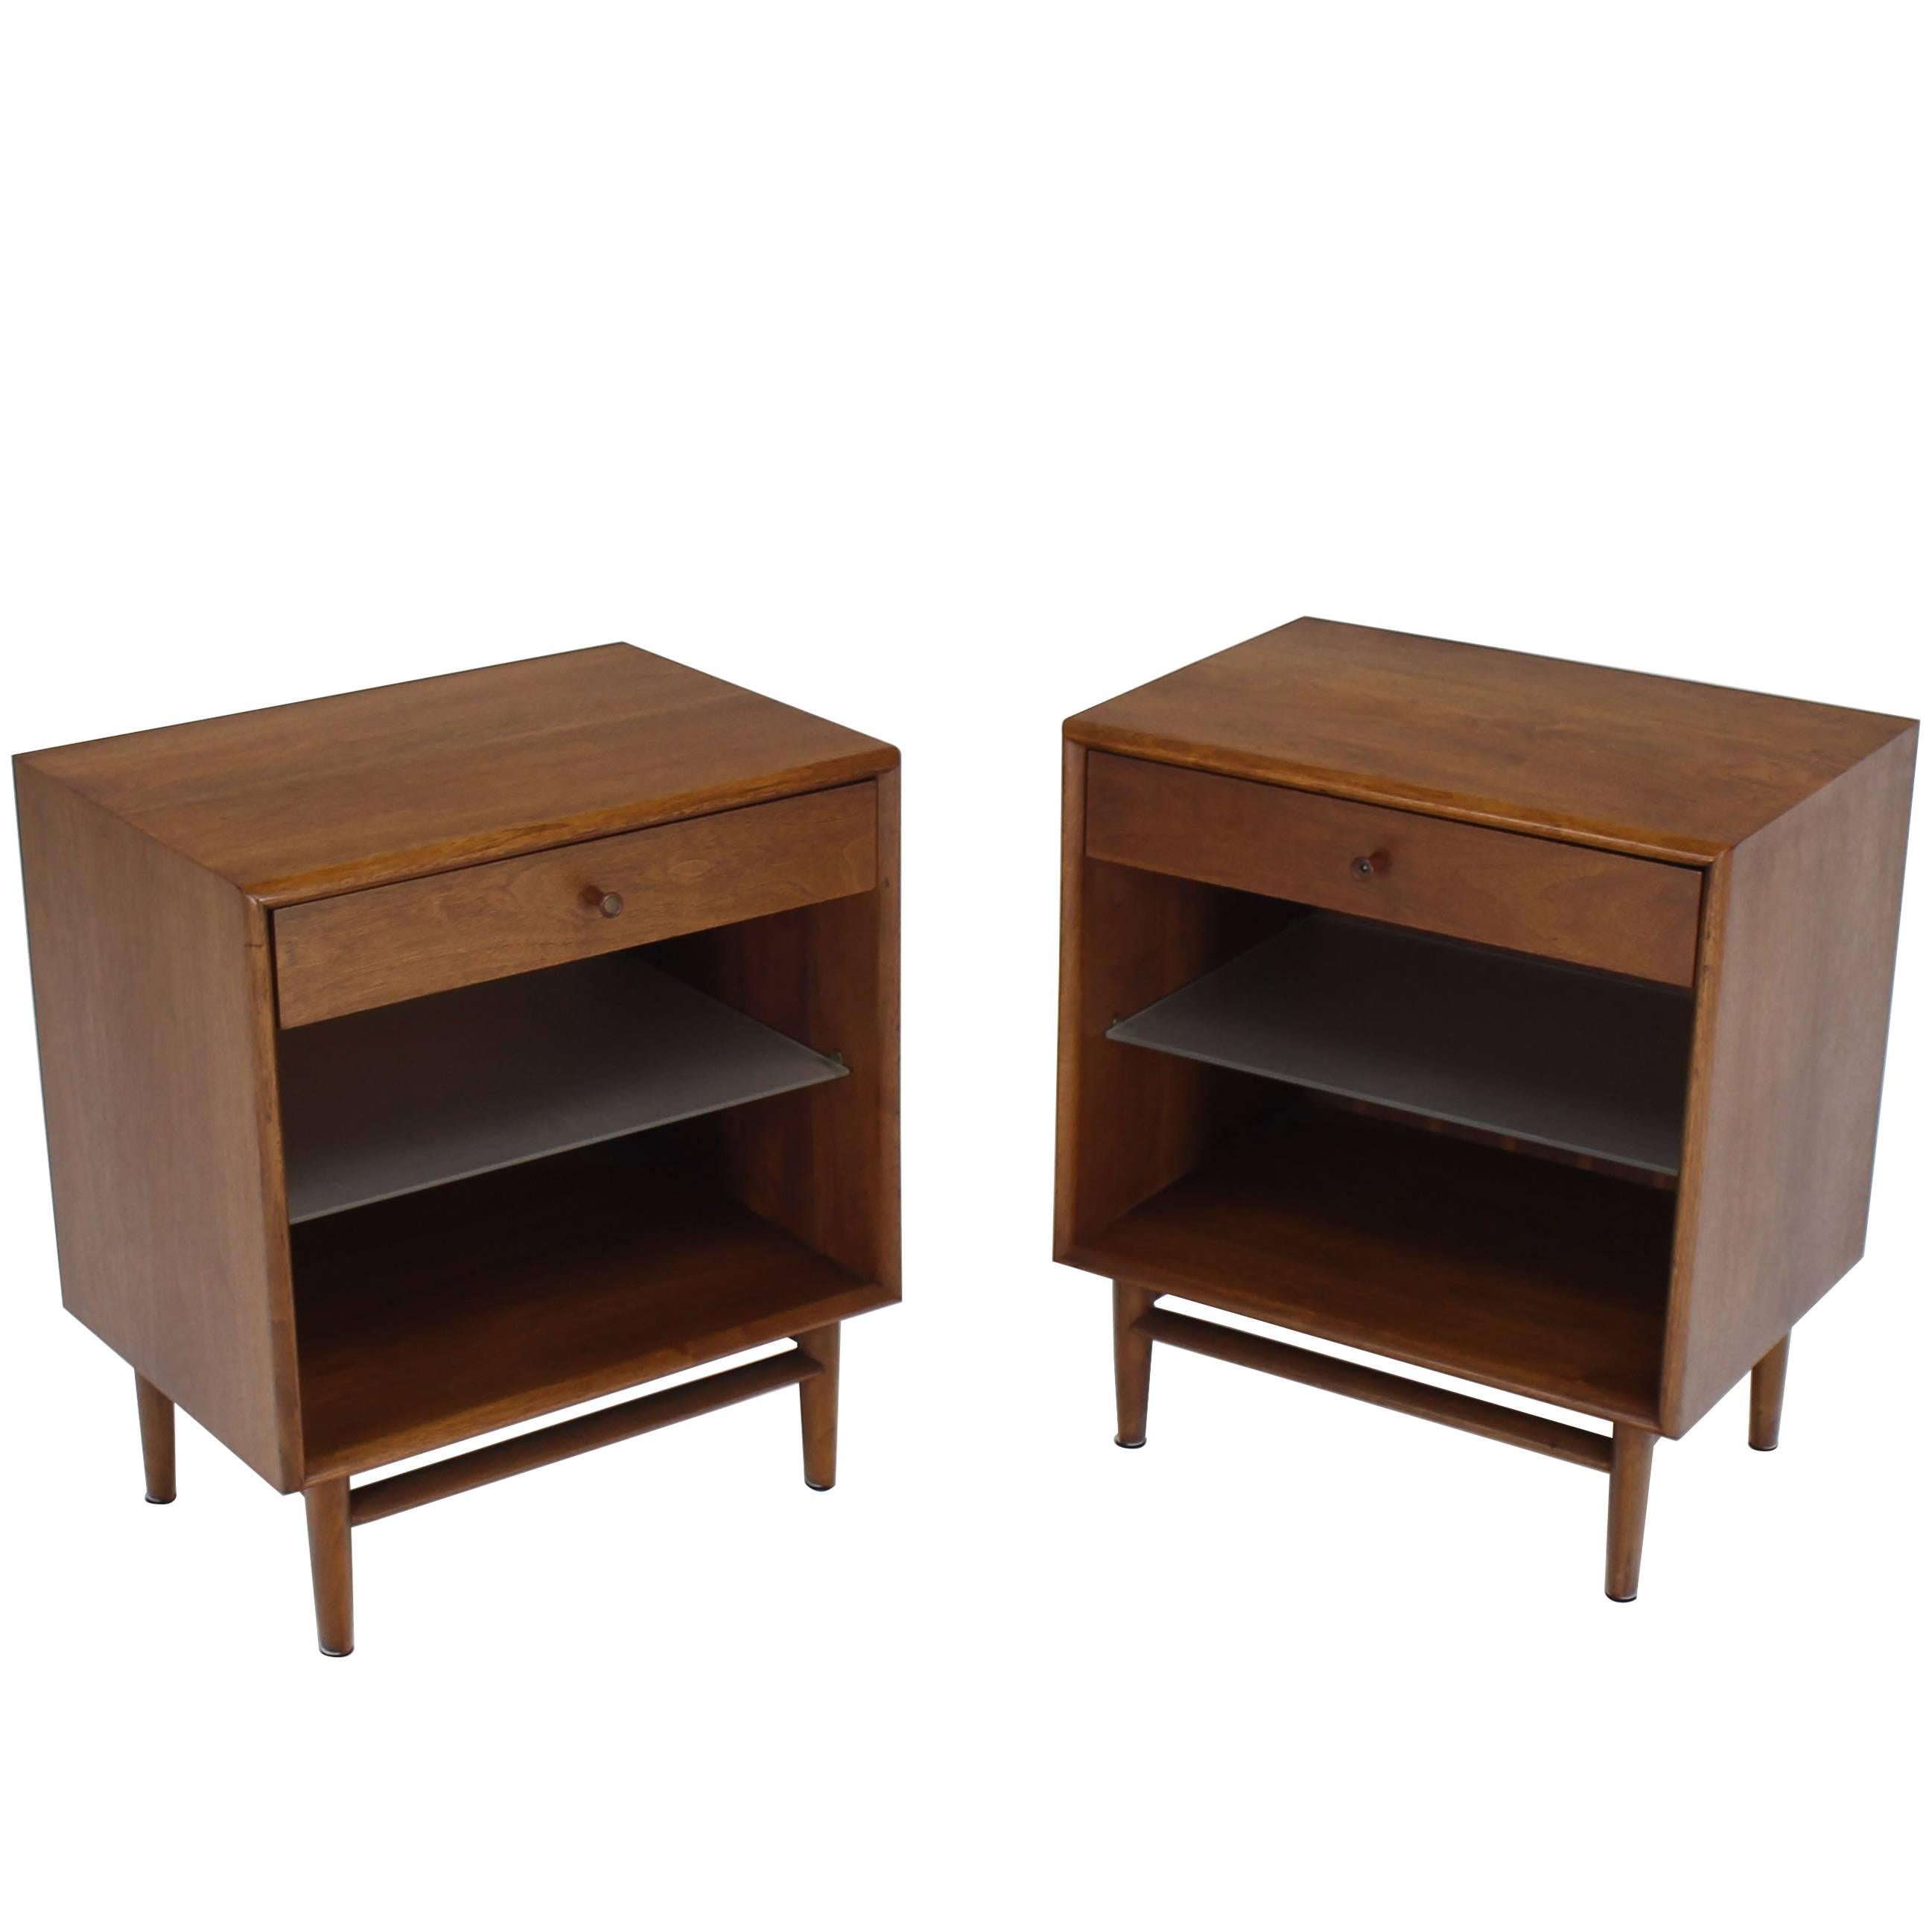 Pair of Walnut One Drawer Nightstands or End Tables